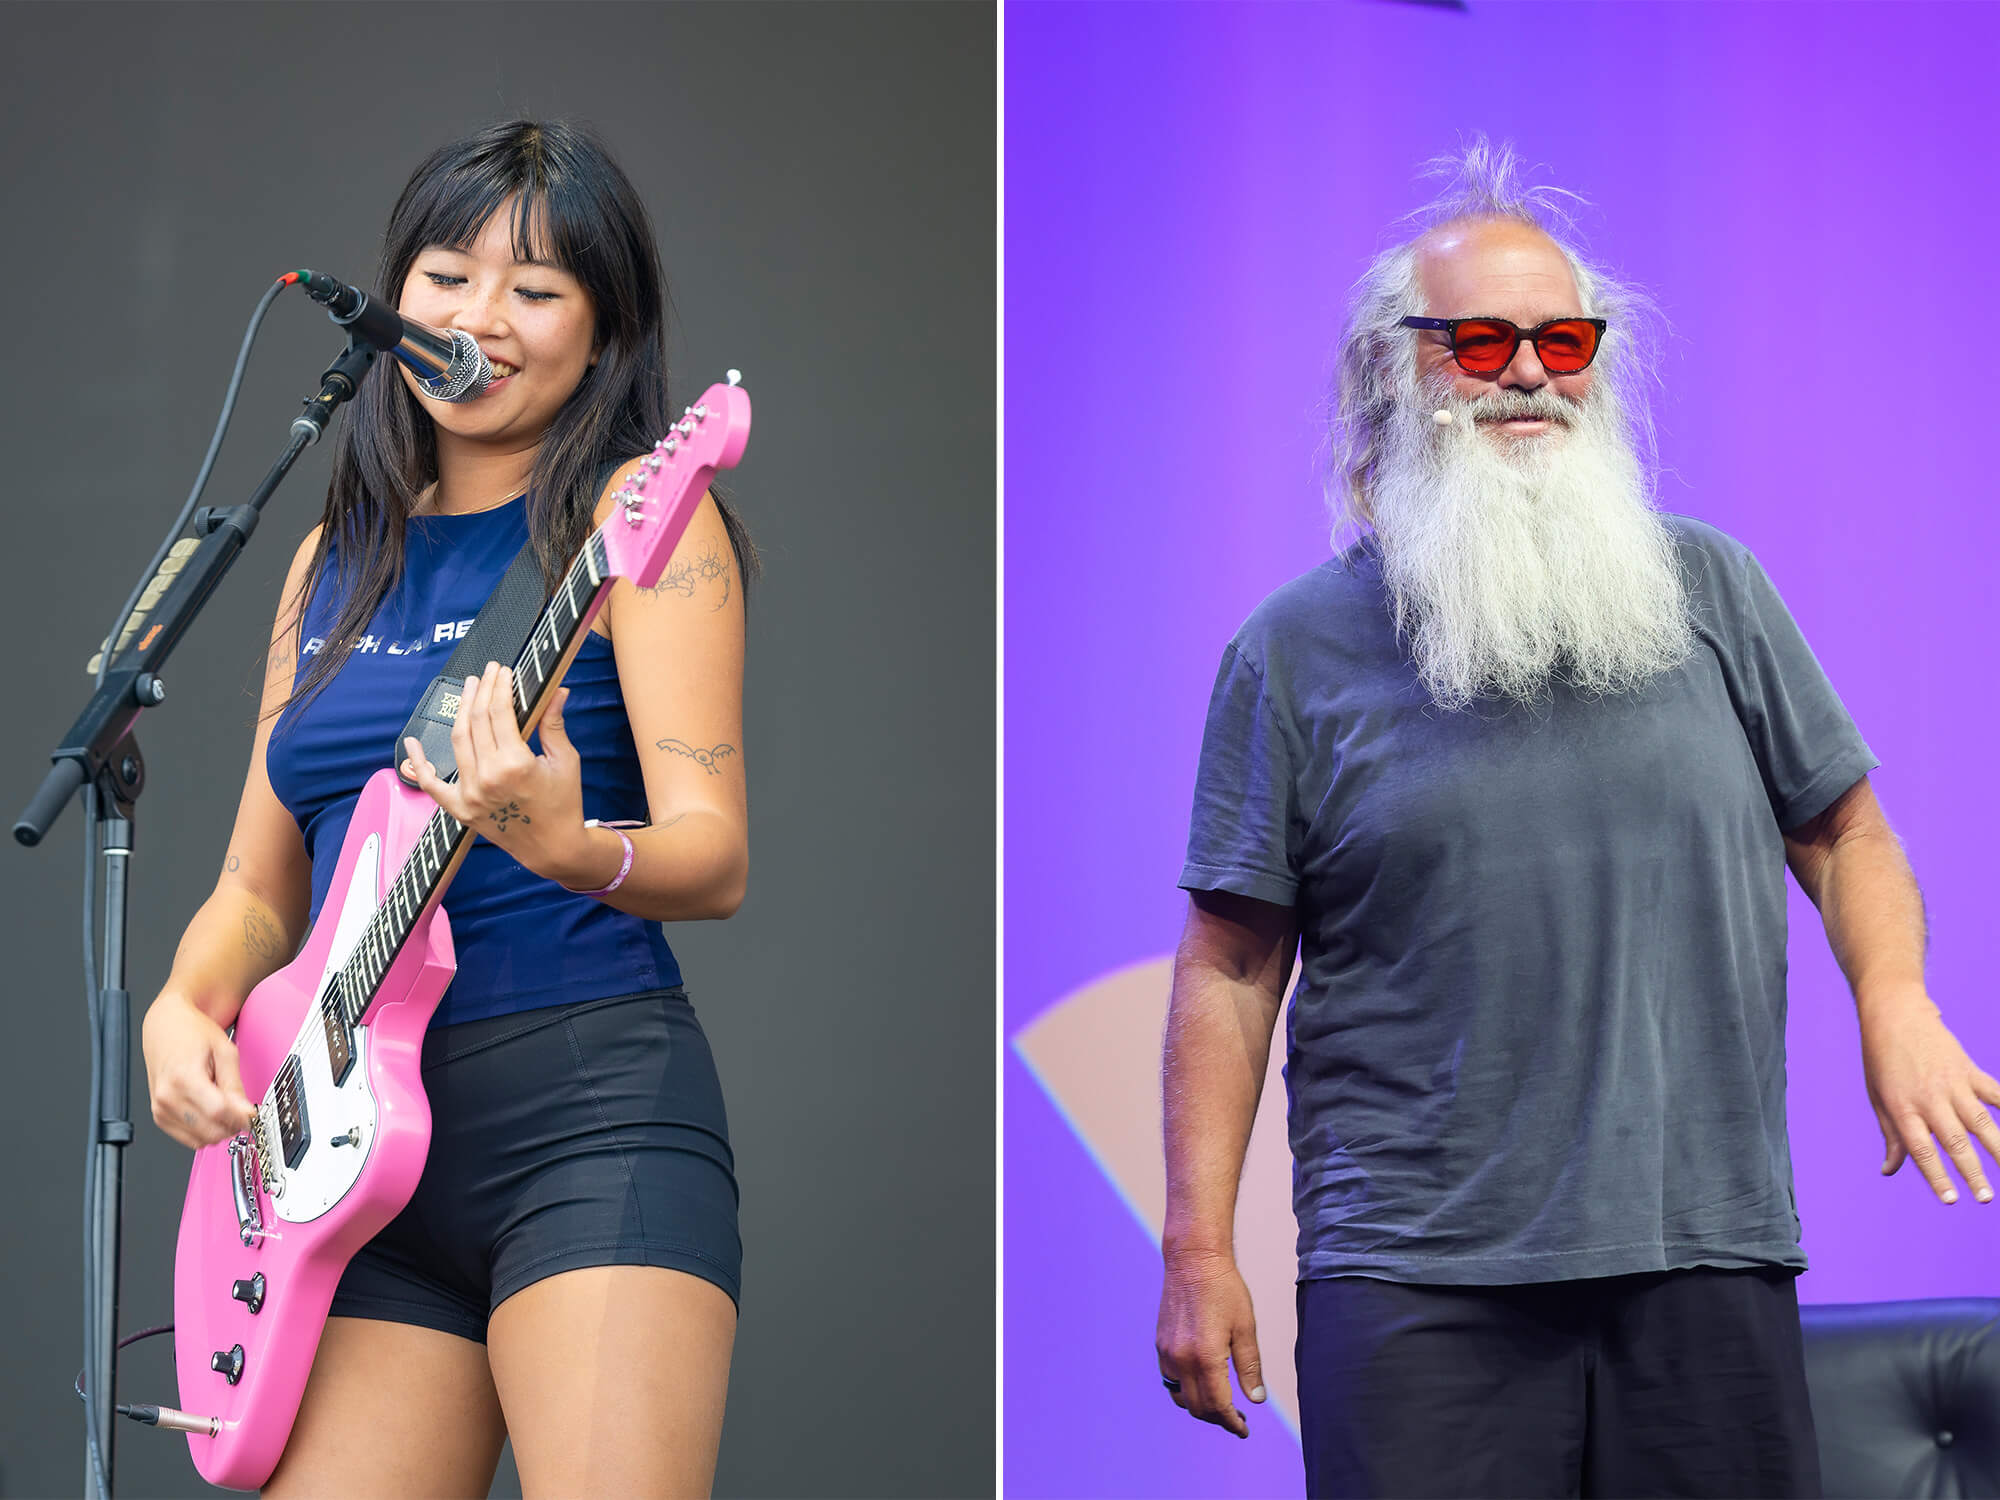 Beabadoobee (left) playing guitar on stage and smiling. Rick Rubin (right) pictured walking on to a stage, he is smiling and wearing red coloured glasses.